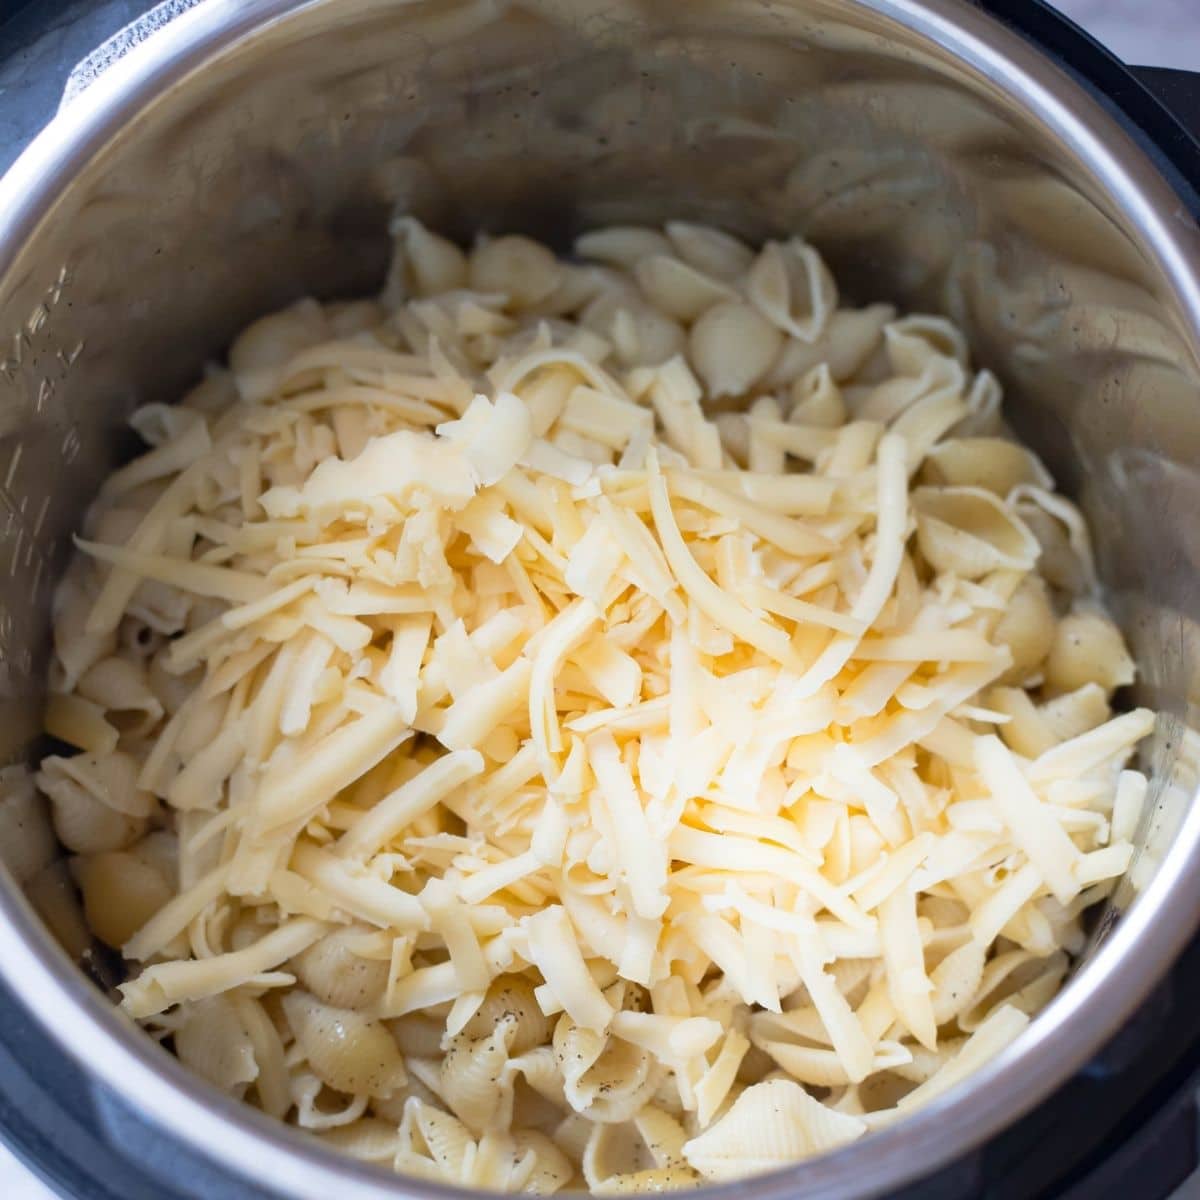 adding shredded gouda cheese to the cooked macaroni.